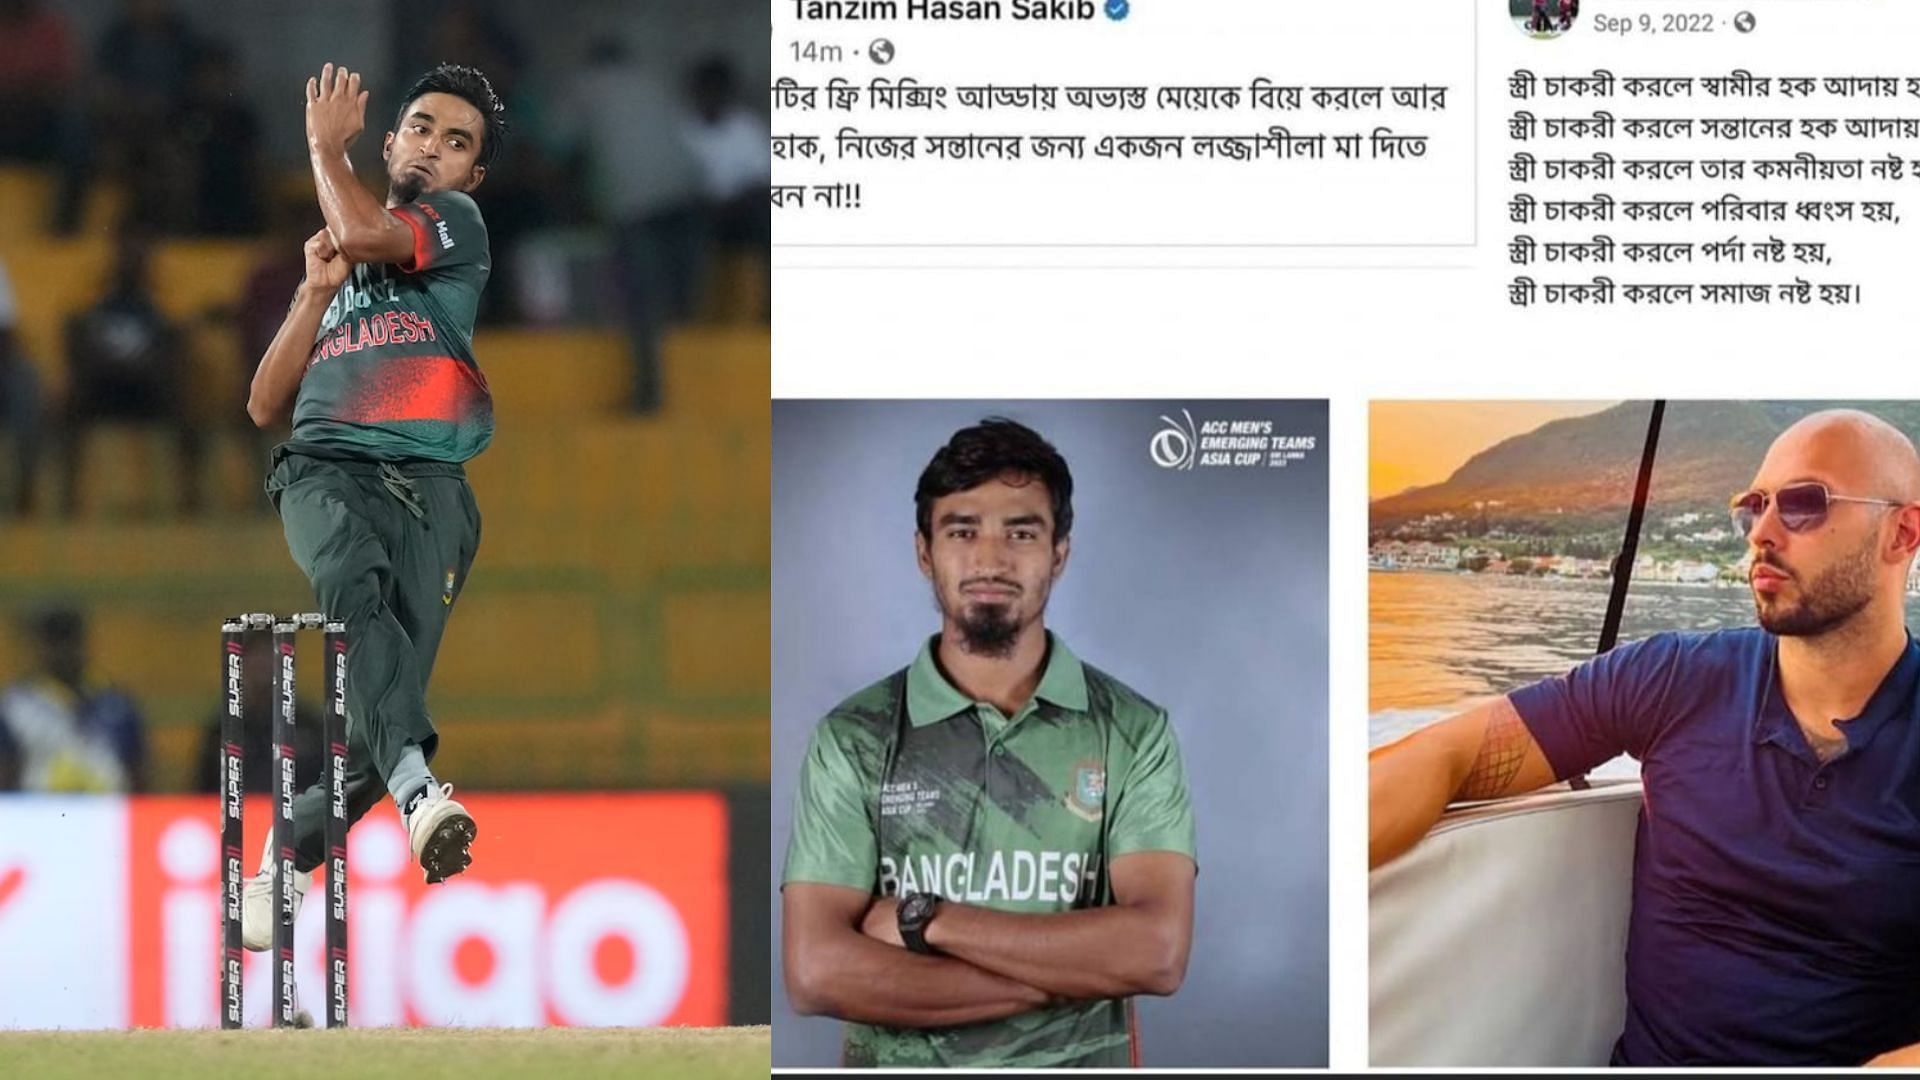 Tanzim Hasan Sakib is being questioned for some of his social media posts (P.C.:X)